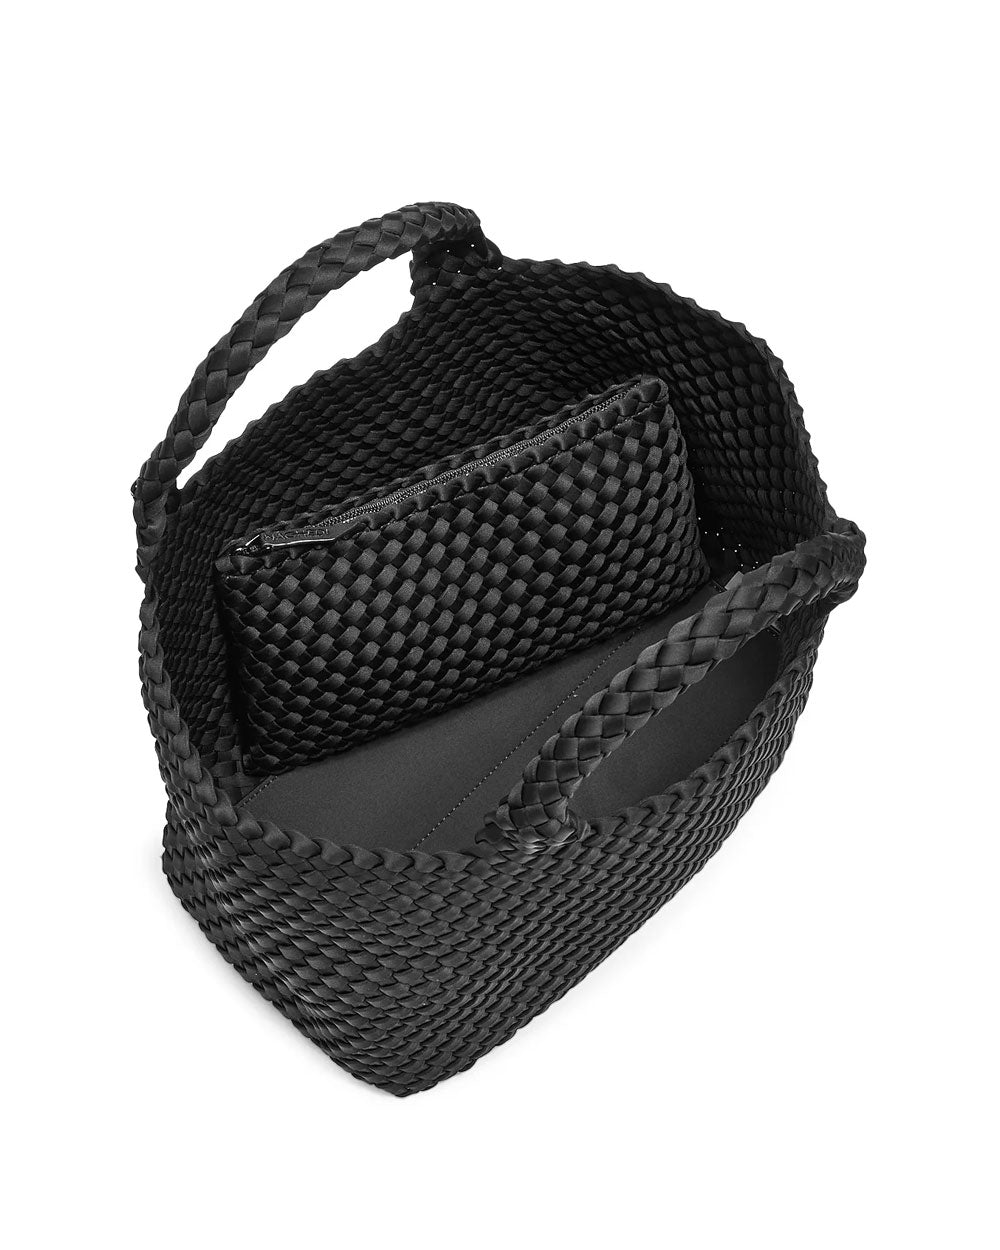 St. Barths Medium Woven Tote in Onyx